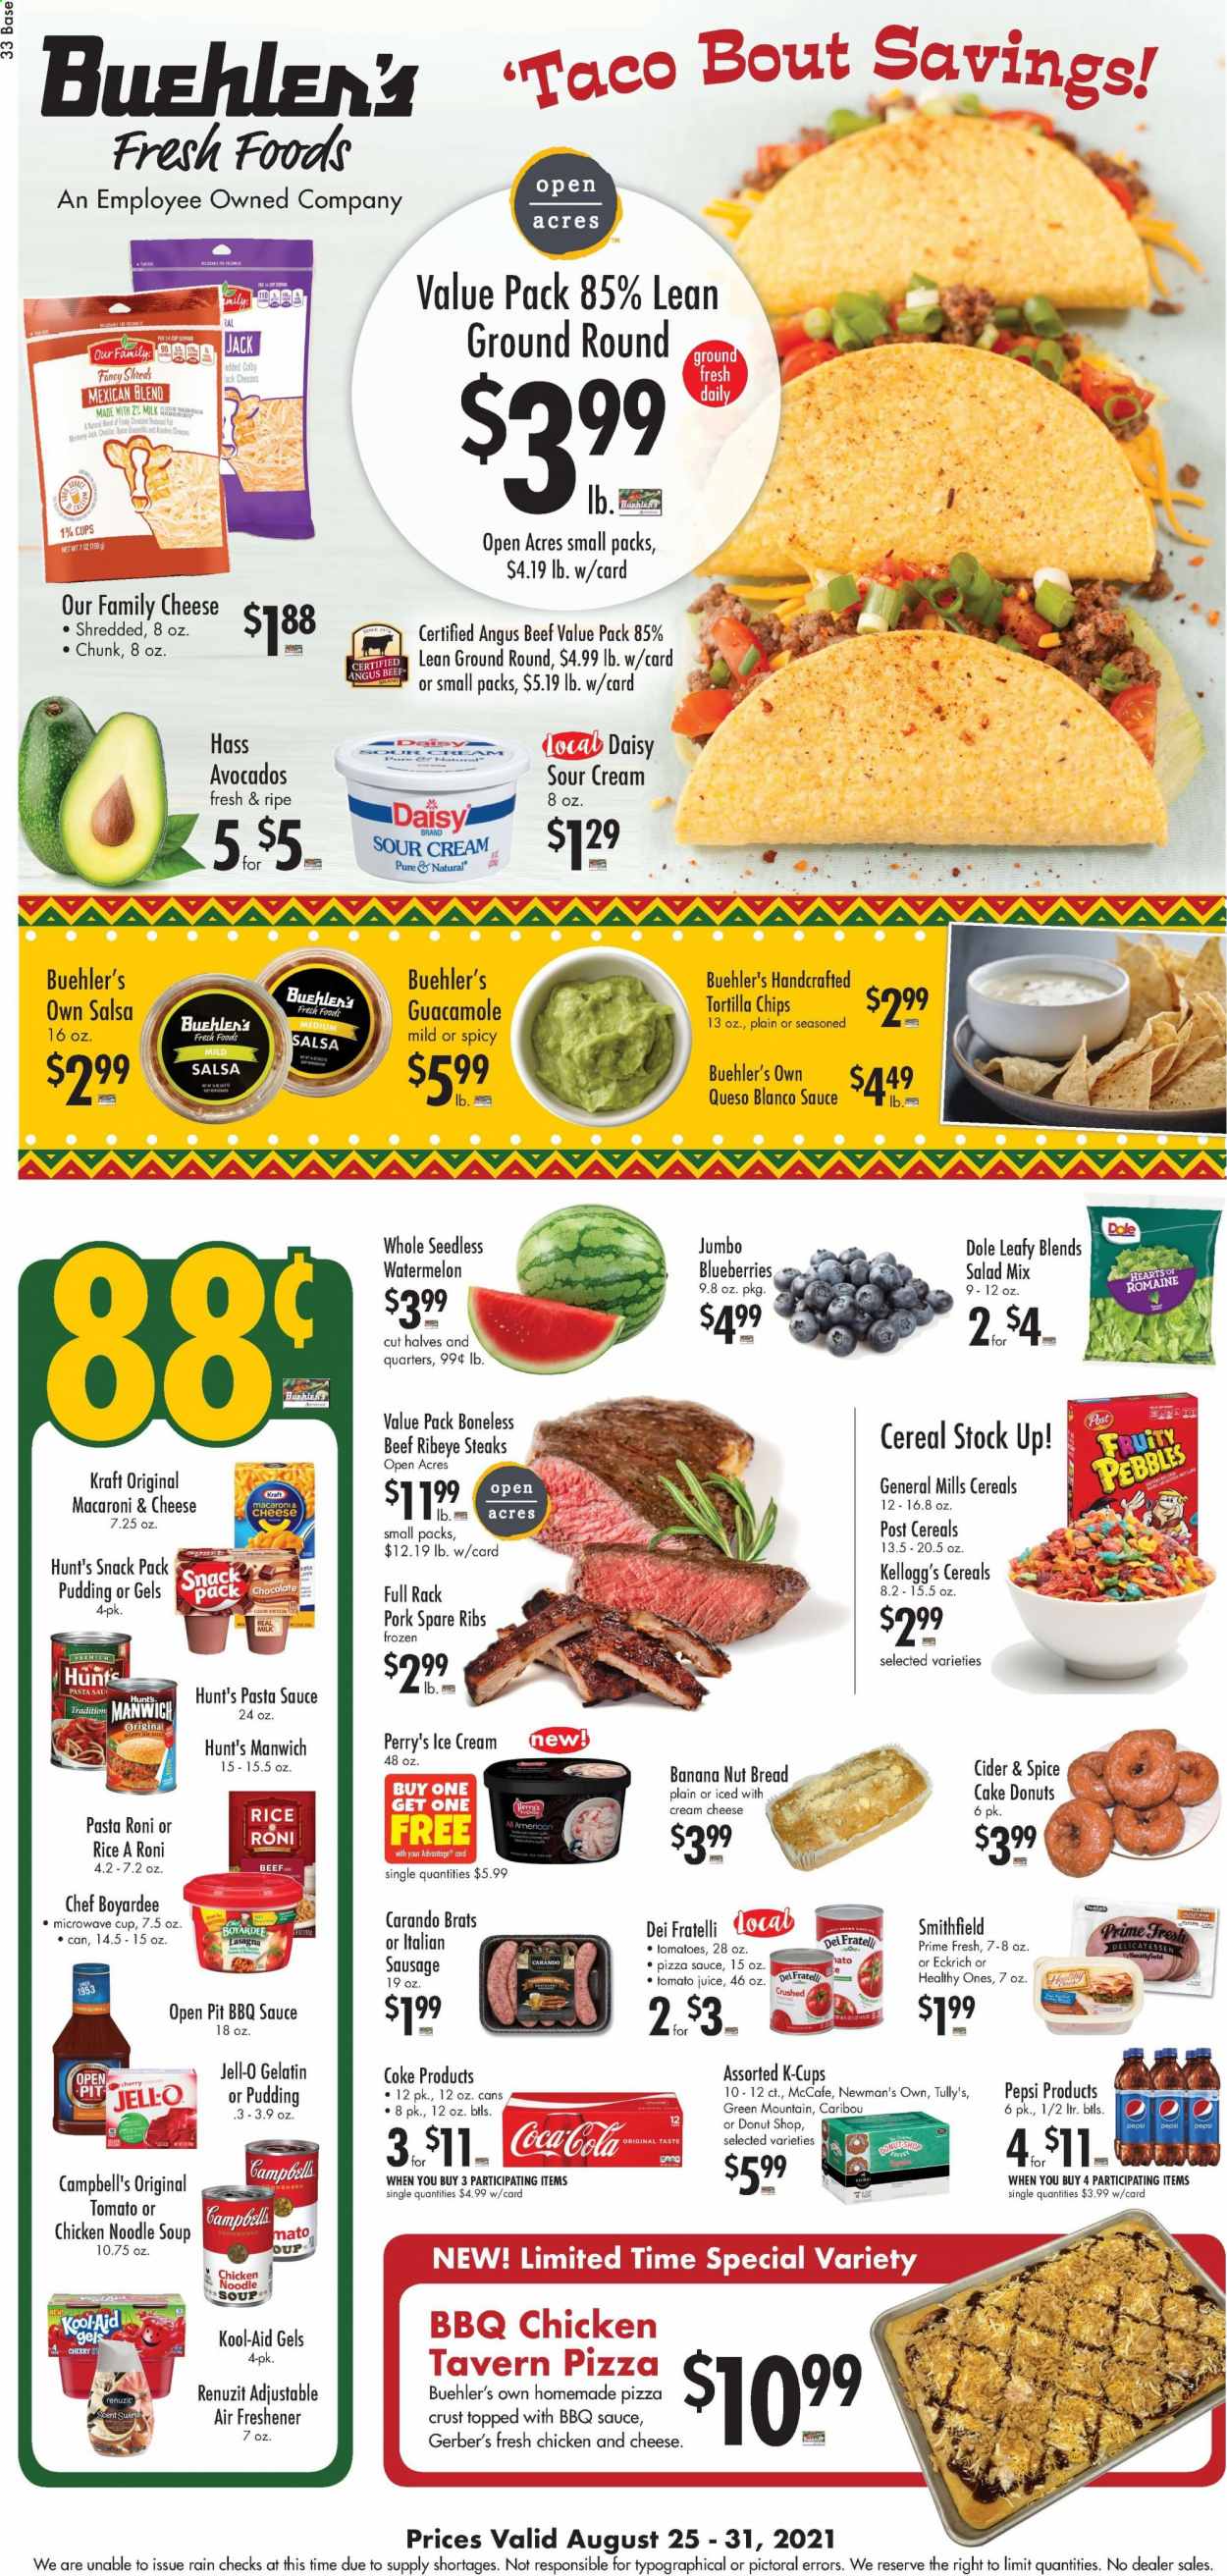 thumbnail - Buehler's Flyer - 08/25/2021 - 08/31/2021 - Sales products - bread, cake, salad, Dole, blueberries, watermelon, cherries, Campbell's, macaroni & cheese, pasta sauce, soup, noodles cup, noodles, lasagna meal, Kraft®, ham, sausage, italian sausage, guacamole, Colby cheese, pudding, milk, sour cream, ice cream, Kellogg's, Gerber, tortilla chips, Jell-O, Manwich, Chef Boyardee, cereals, Fruity Pebbles, rice, spice, BBQ sauce, salsa, Coca-Cola, tomato juice, Pepsi, juice, coffee, coffee capsules, McCafe, K-Cups, Green Mountain, cider, beef meat, steak, ribeye steak, pork meat, pork ribs, pork spare ribs, Renuzit, air freshener. Page 1.